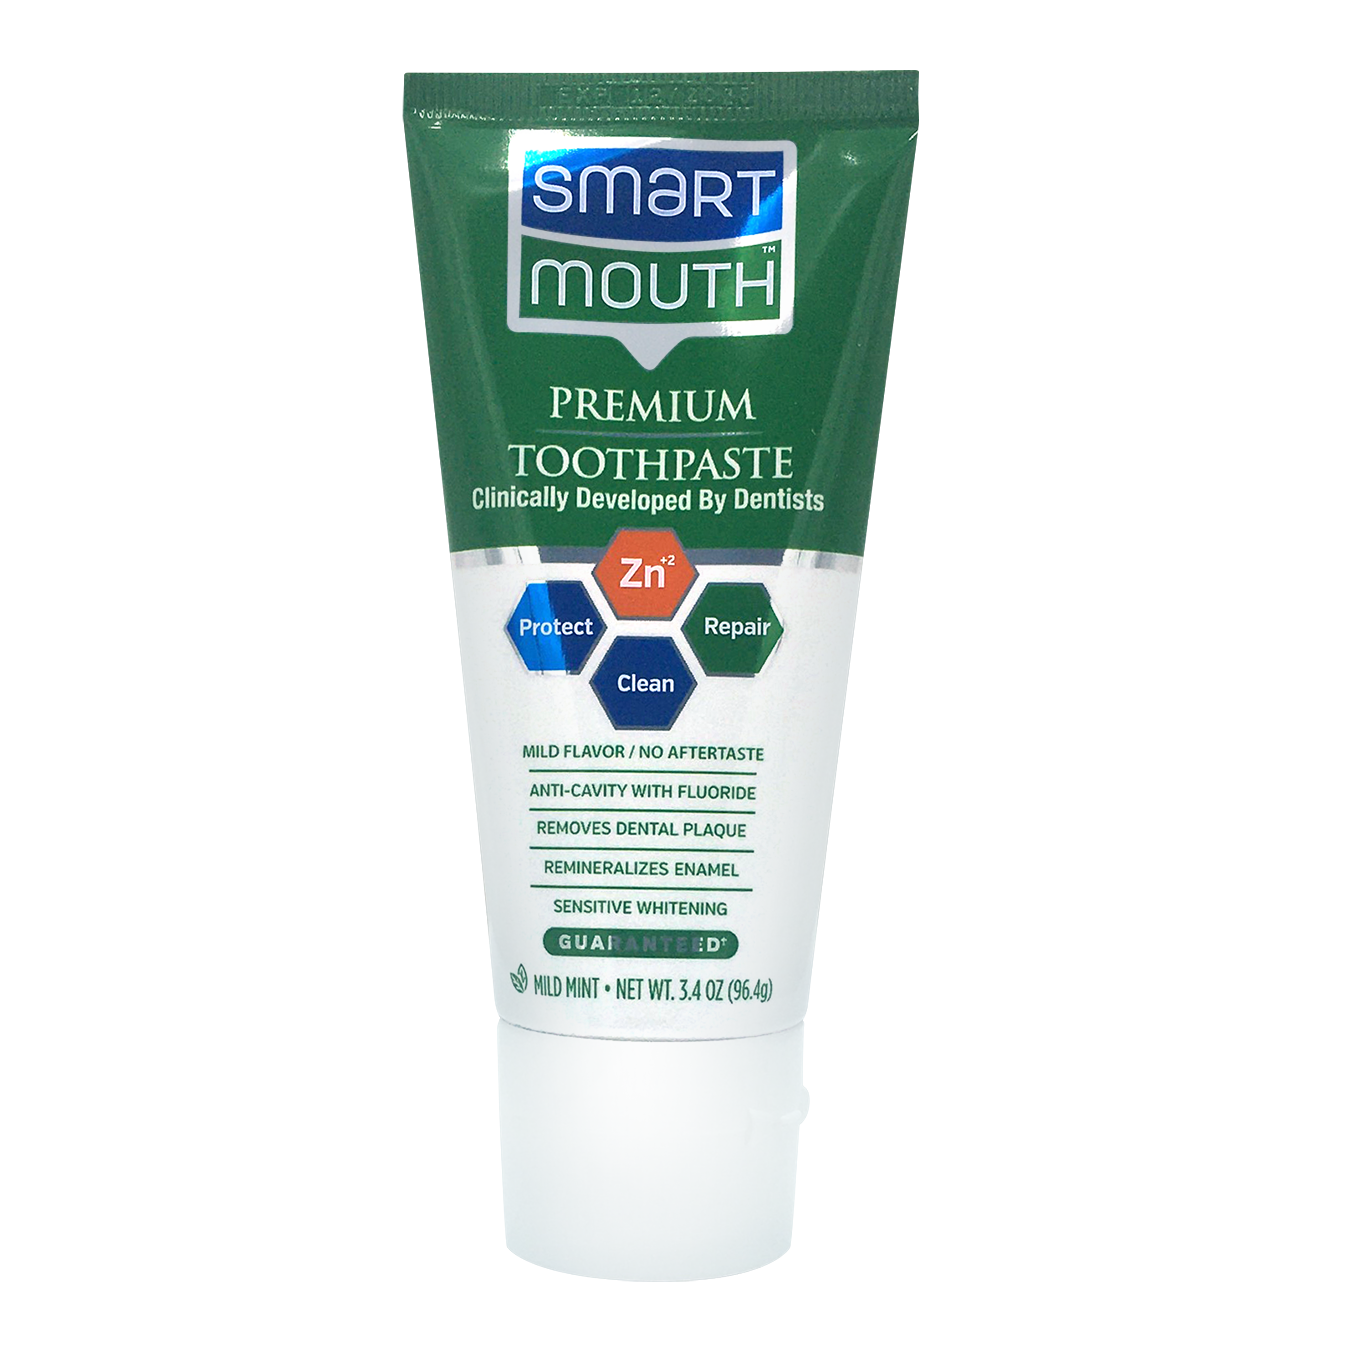 SmartMouth™ Dry Mouth SmartBox 1-Month Supply Kit